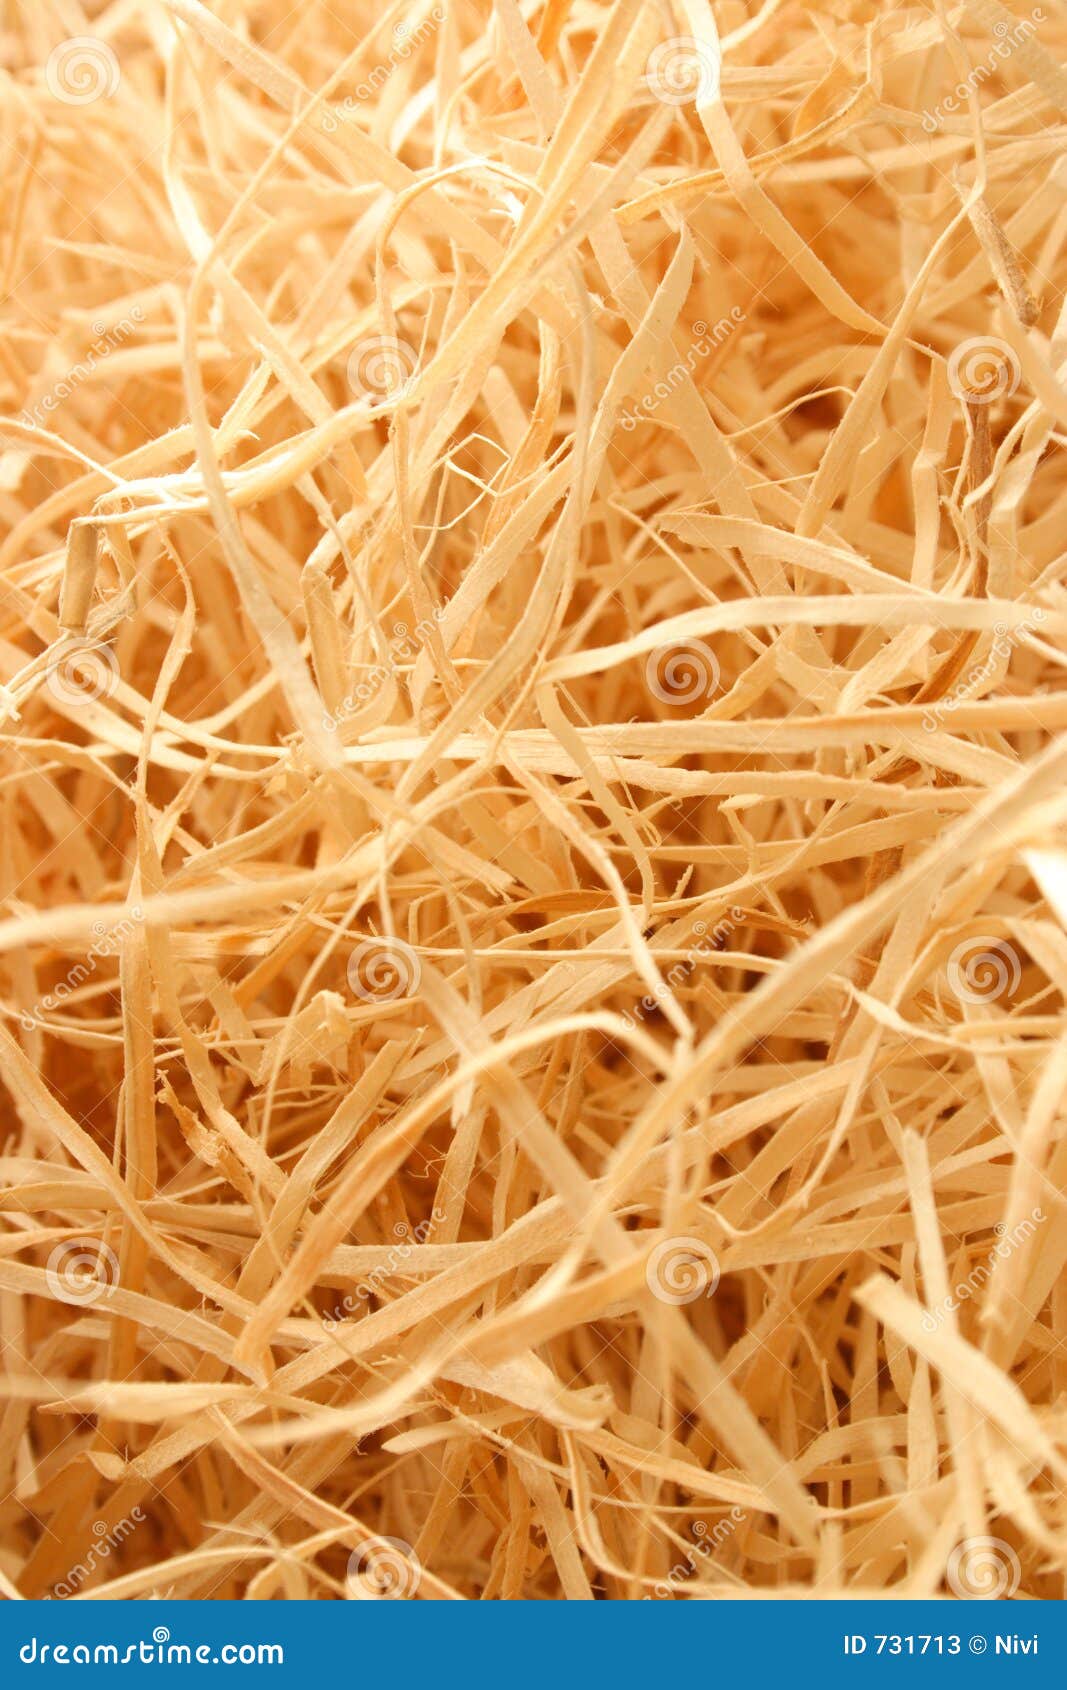 packing with wood-wool stock image. image of crinkle